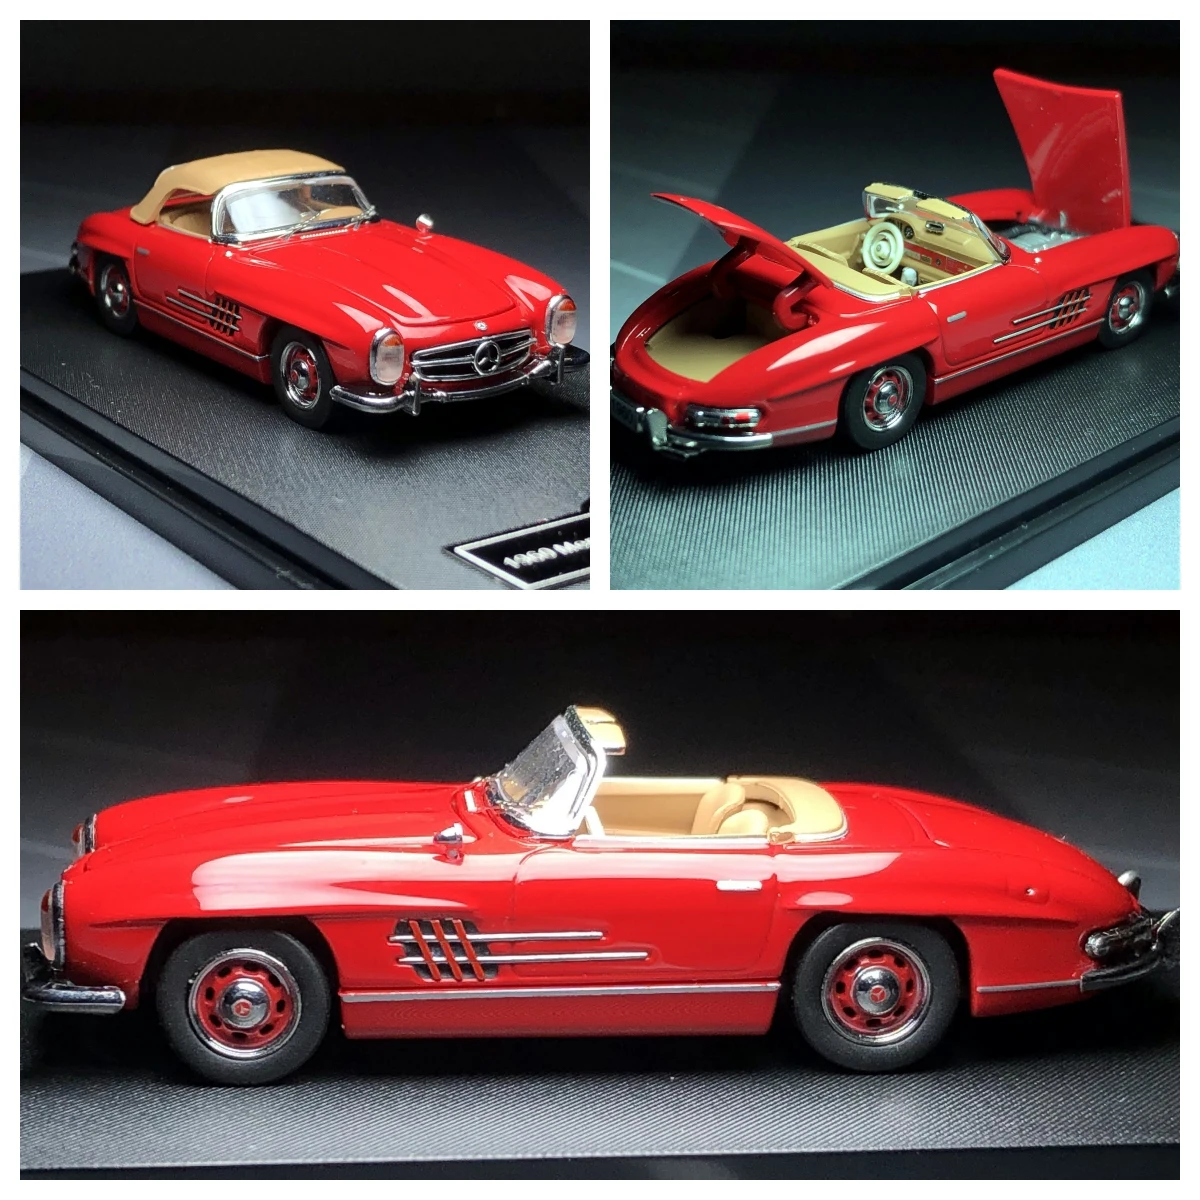 

GFCC 1:64 MB 300 SL Roadster Convertible Red soft top Diecast Model Car Collection Limited Edition Hobby Toys